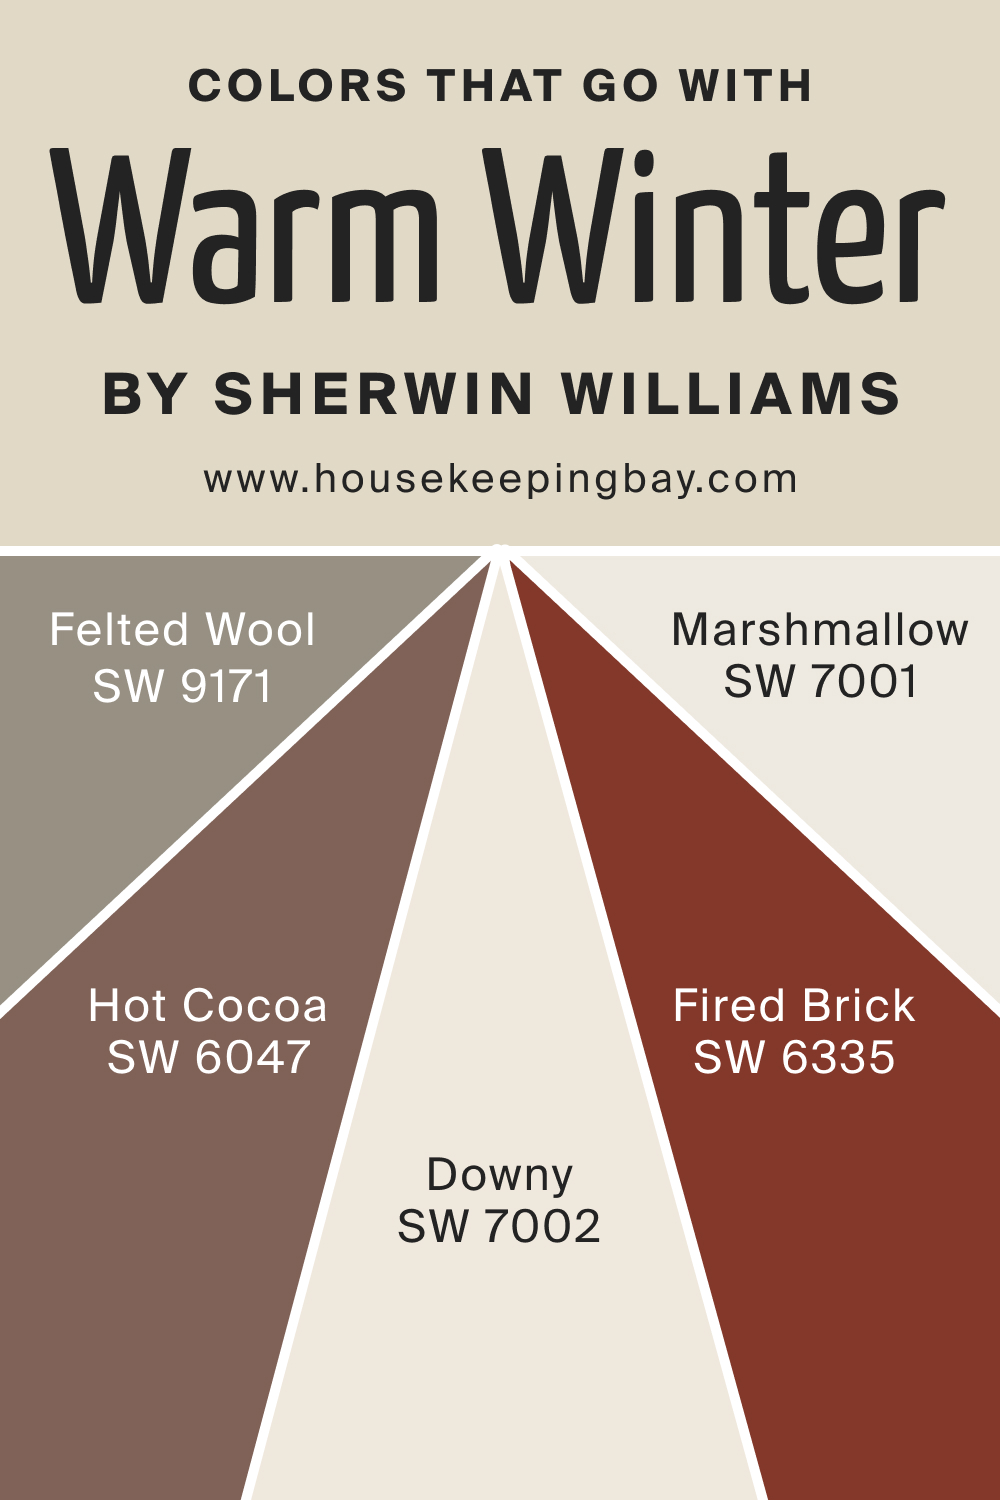 Colors that goes with SW 9506 Warm Winter by Sherwin Williams